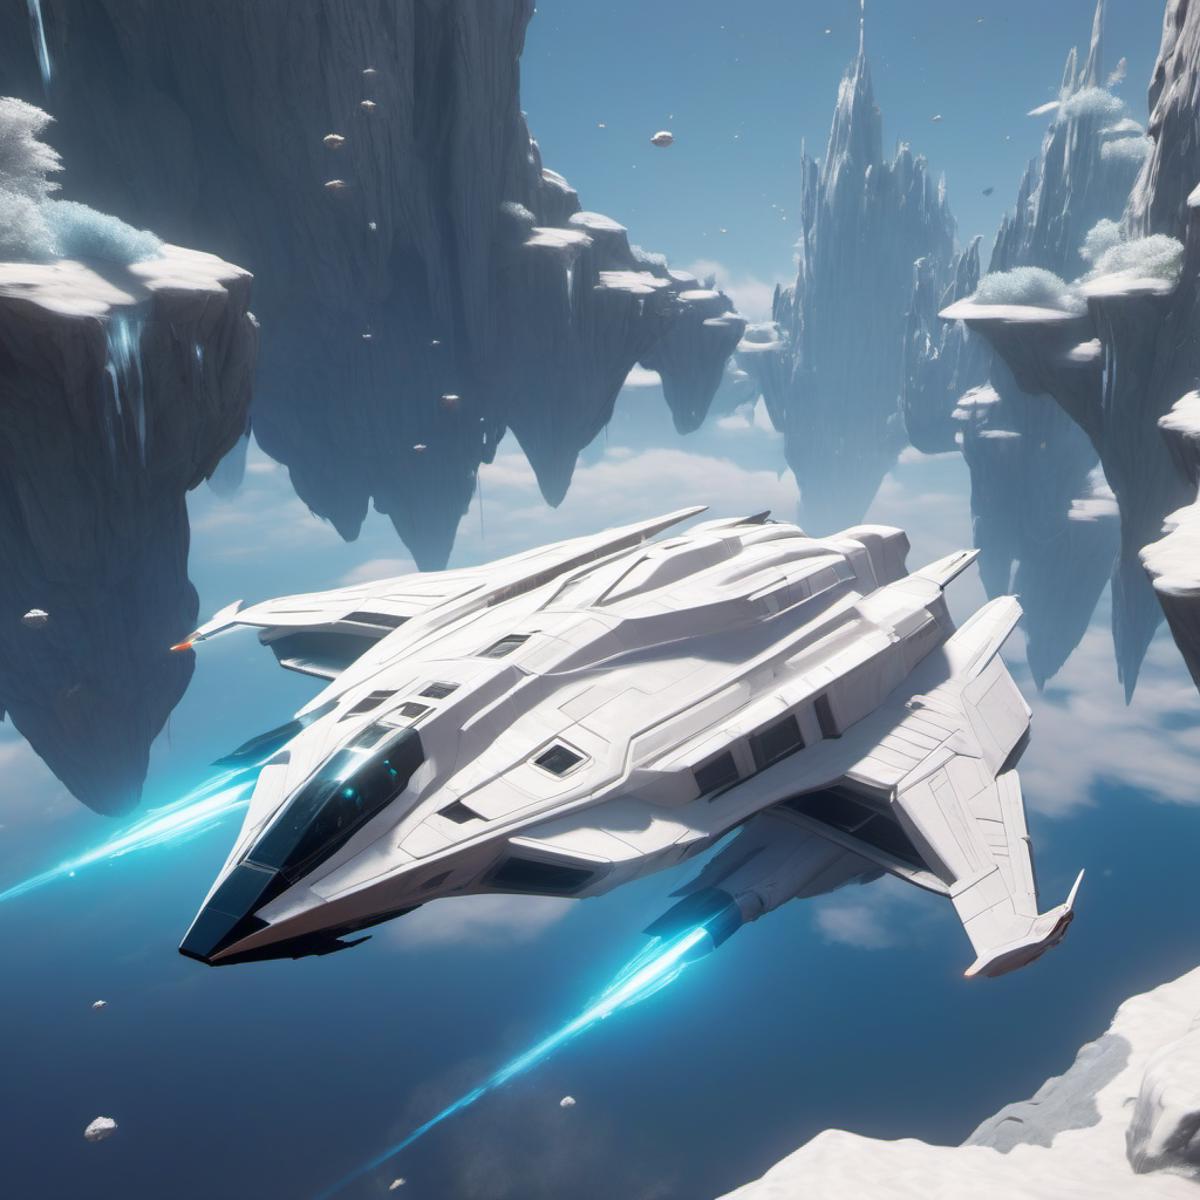 StarCitizen XL image by braintacles